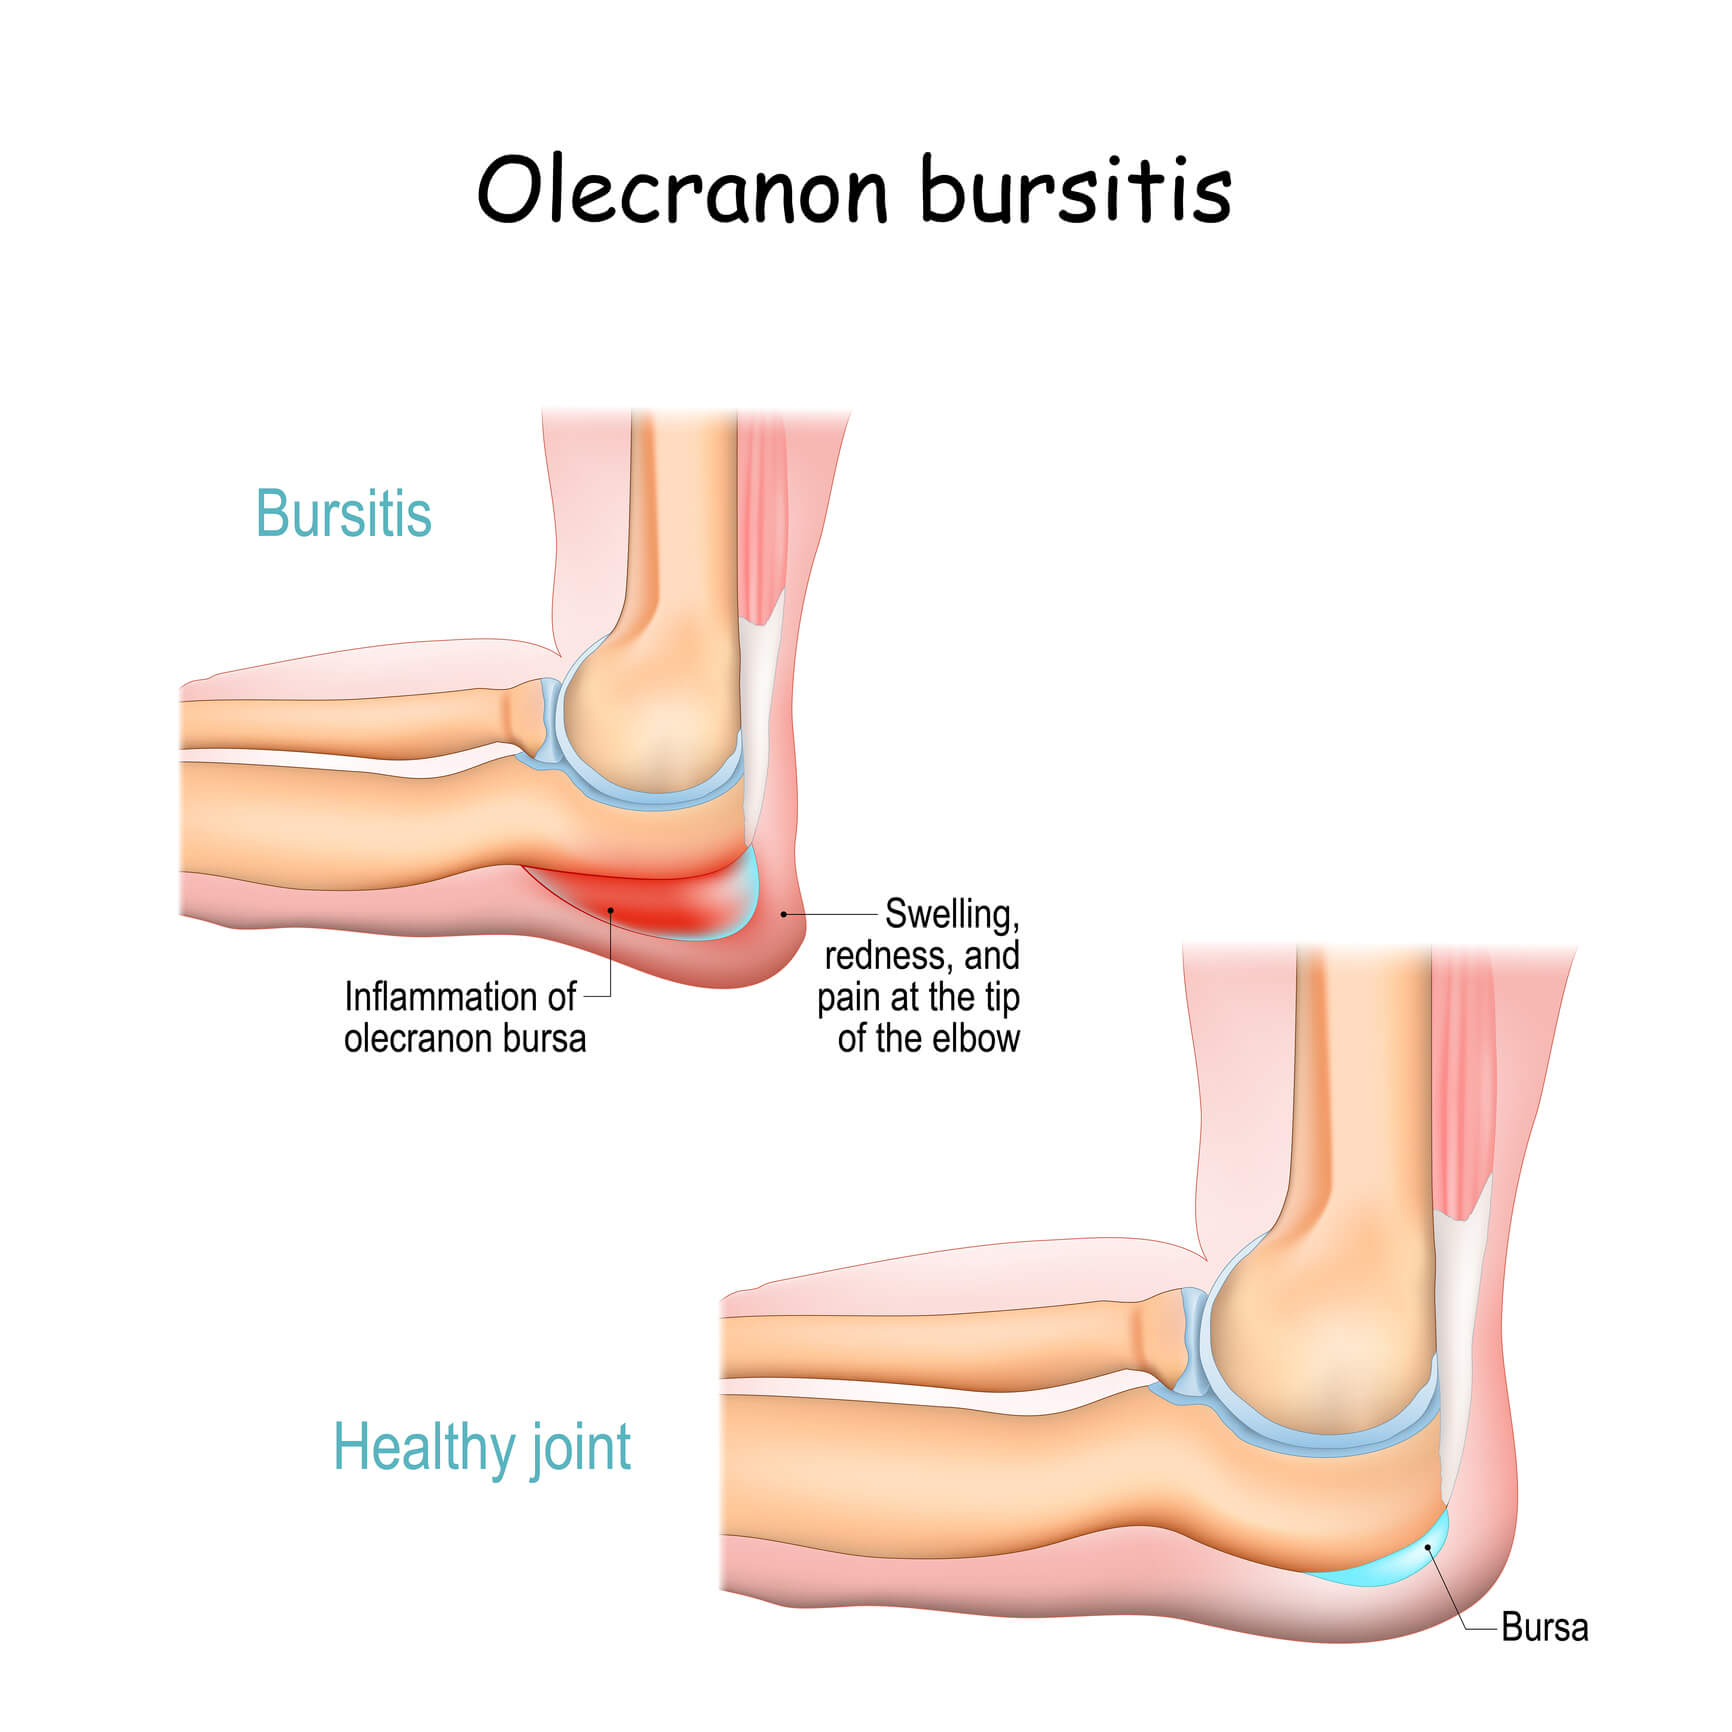 Image of an elbow affected by olecranon bursitis